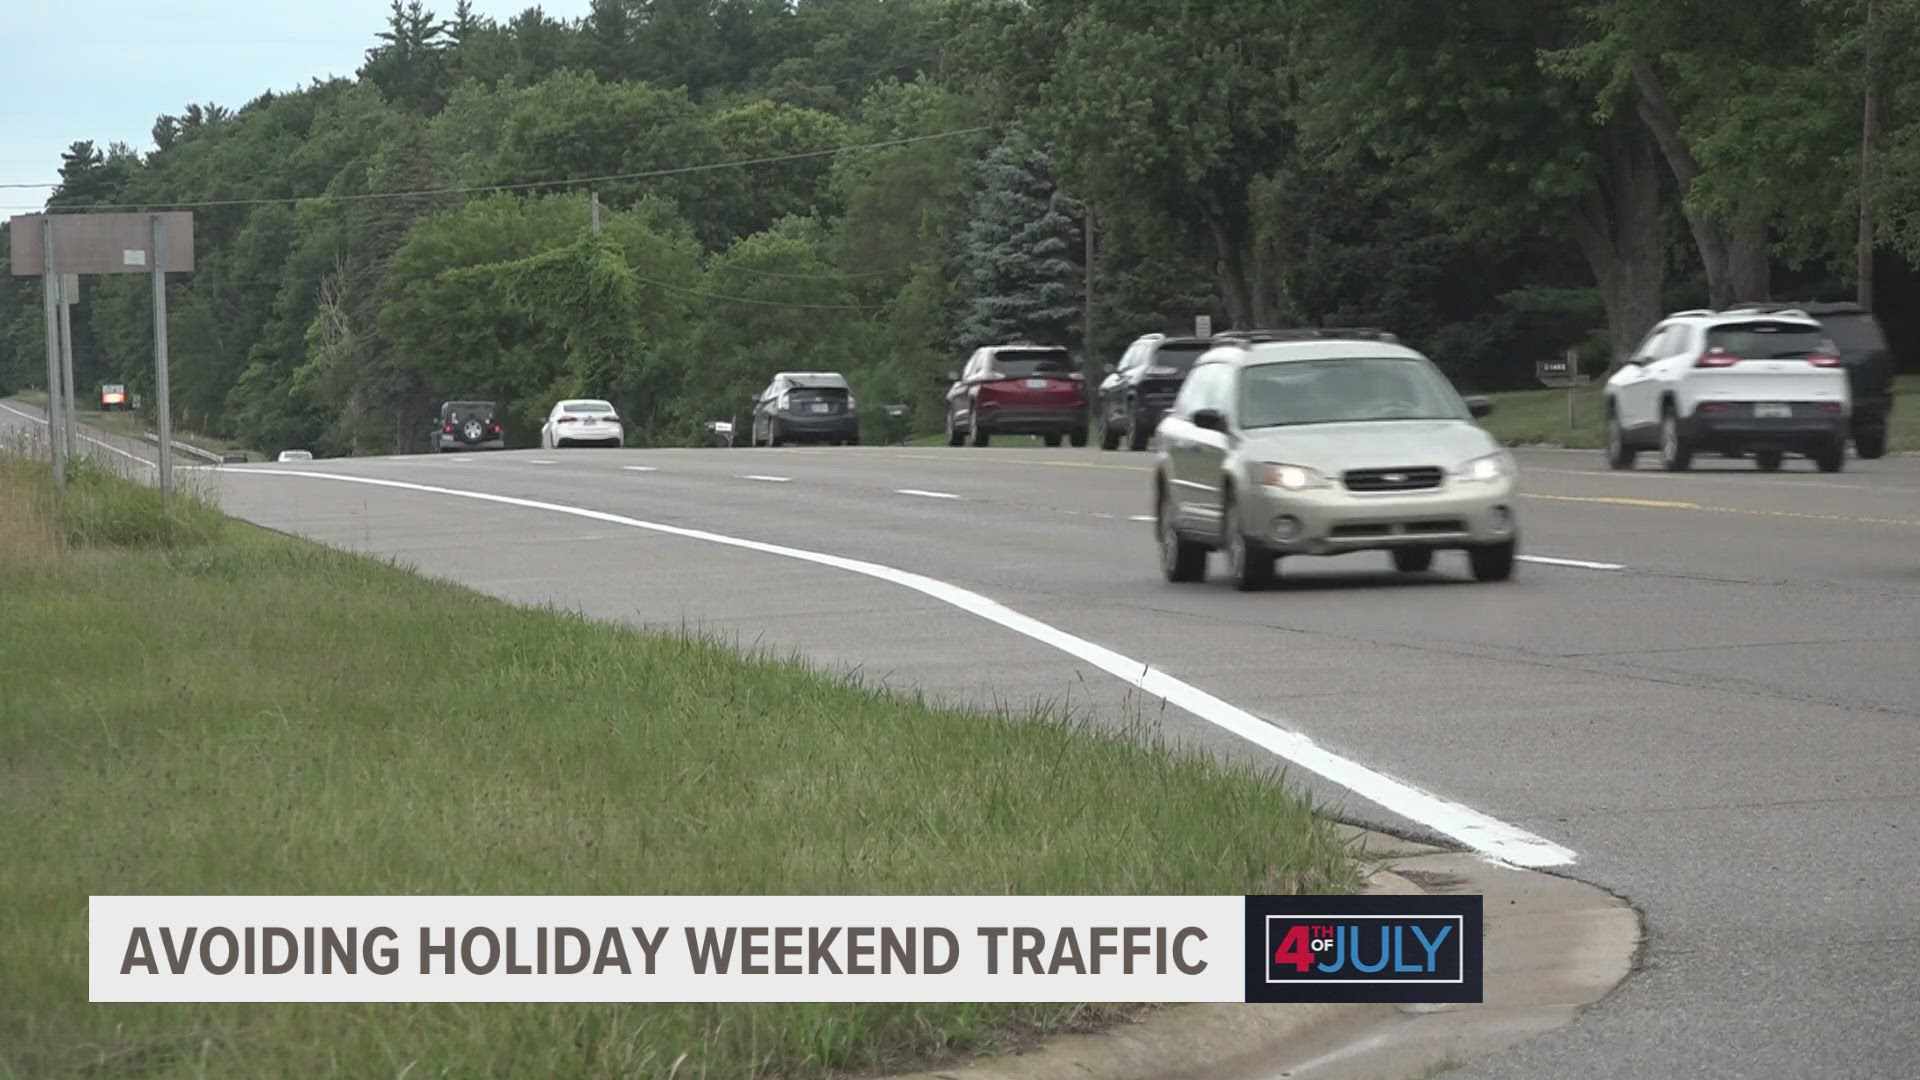 You can expect delays if you'll be hitting the road for your Fourth of July plans. Here's what you should know.